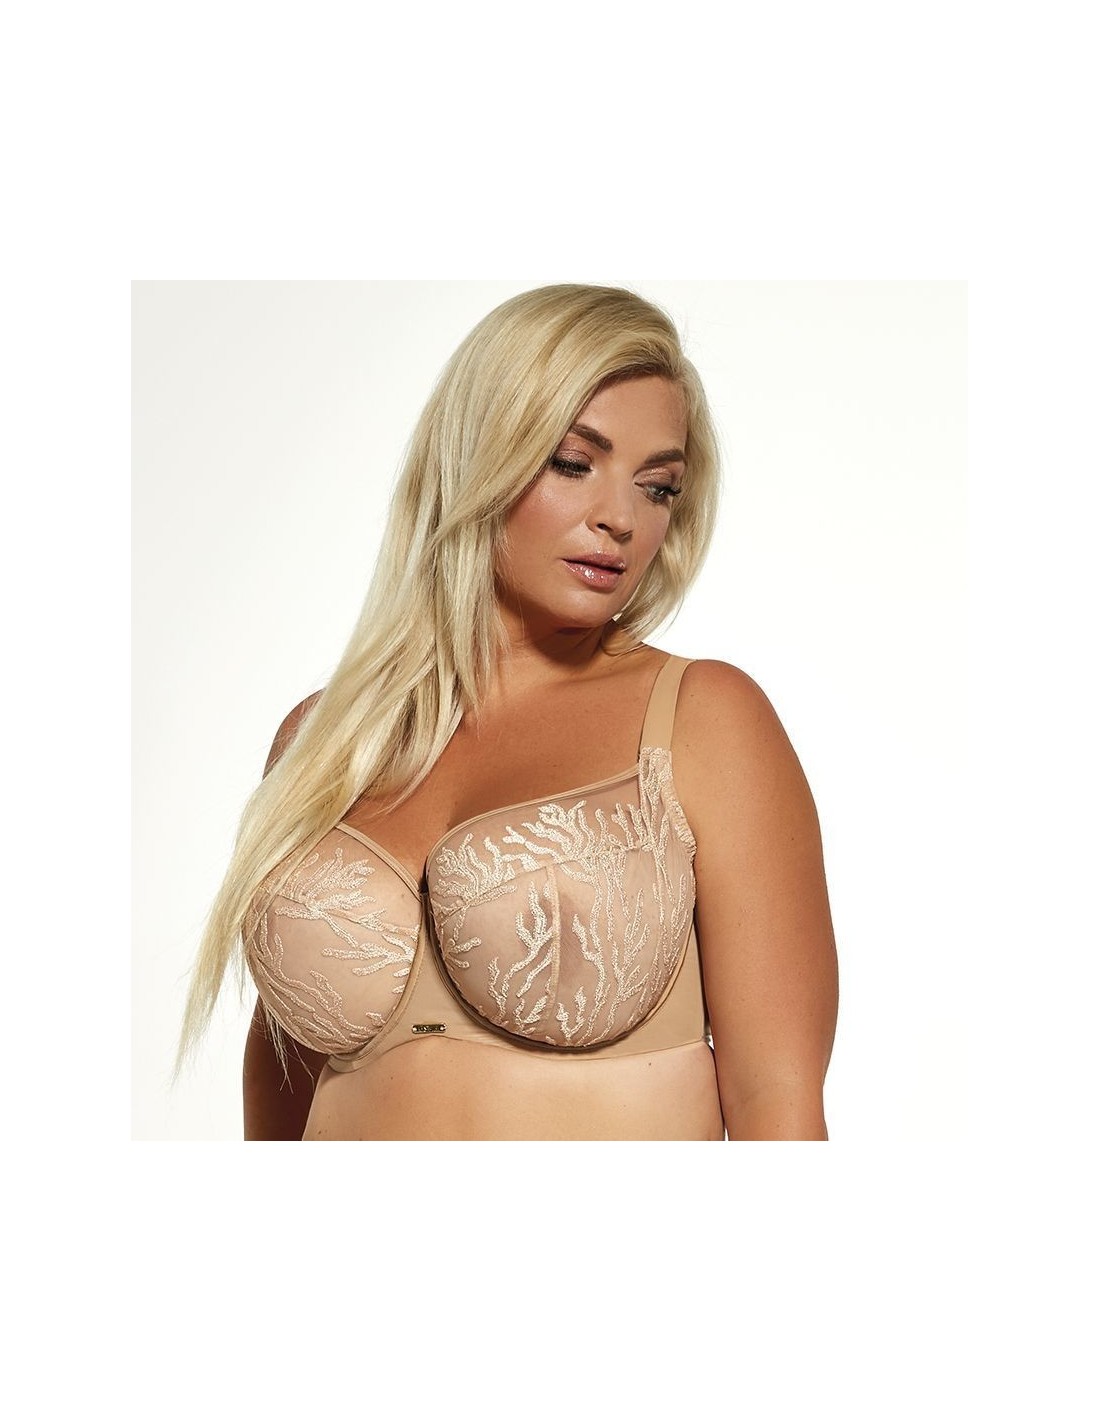 Plus Size Bra with Full Soft Cups with Embroidery - Krisline CARMEN